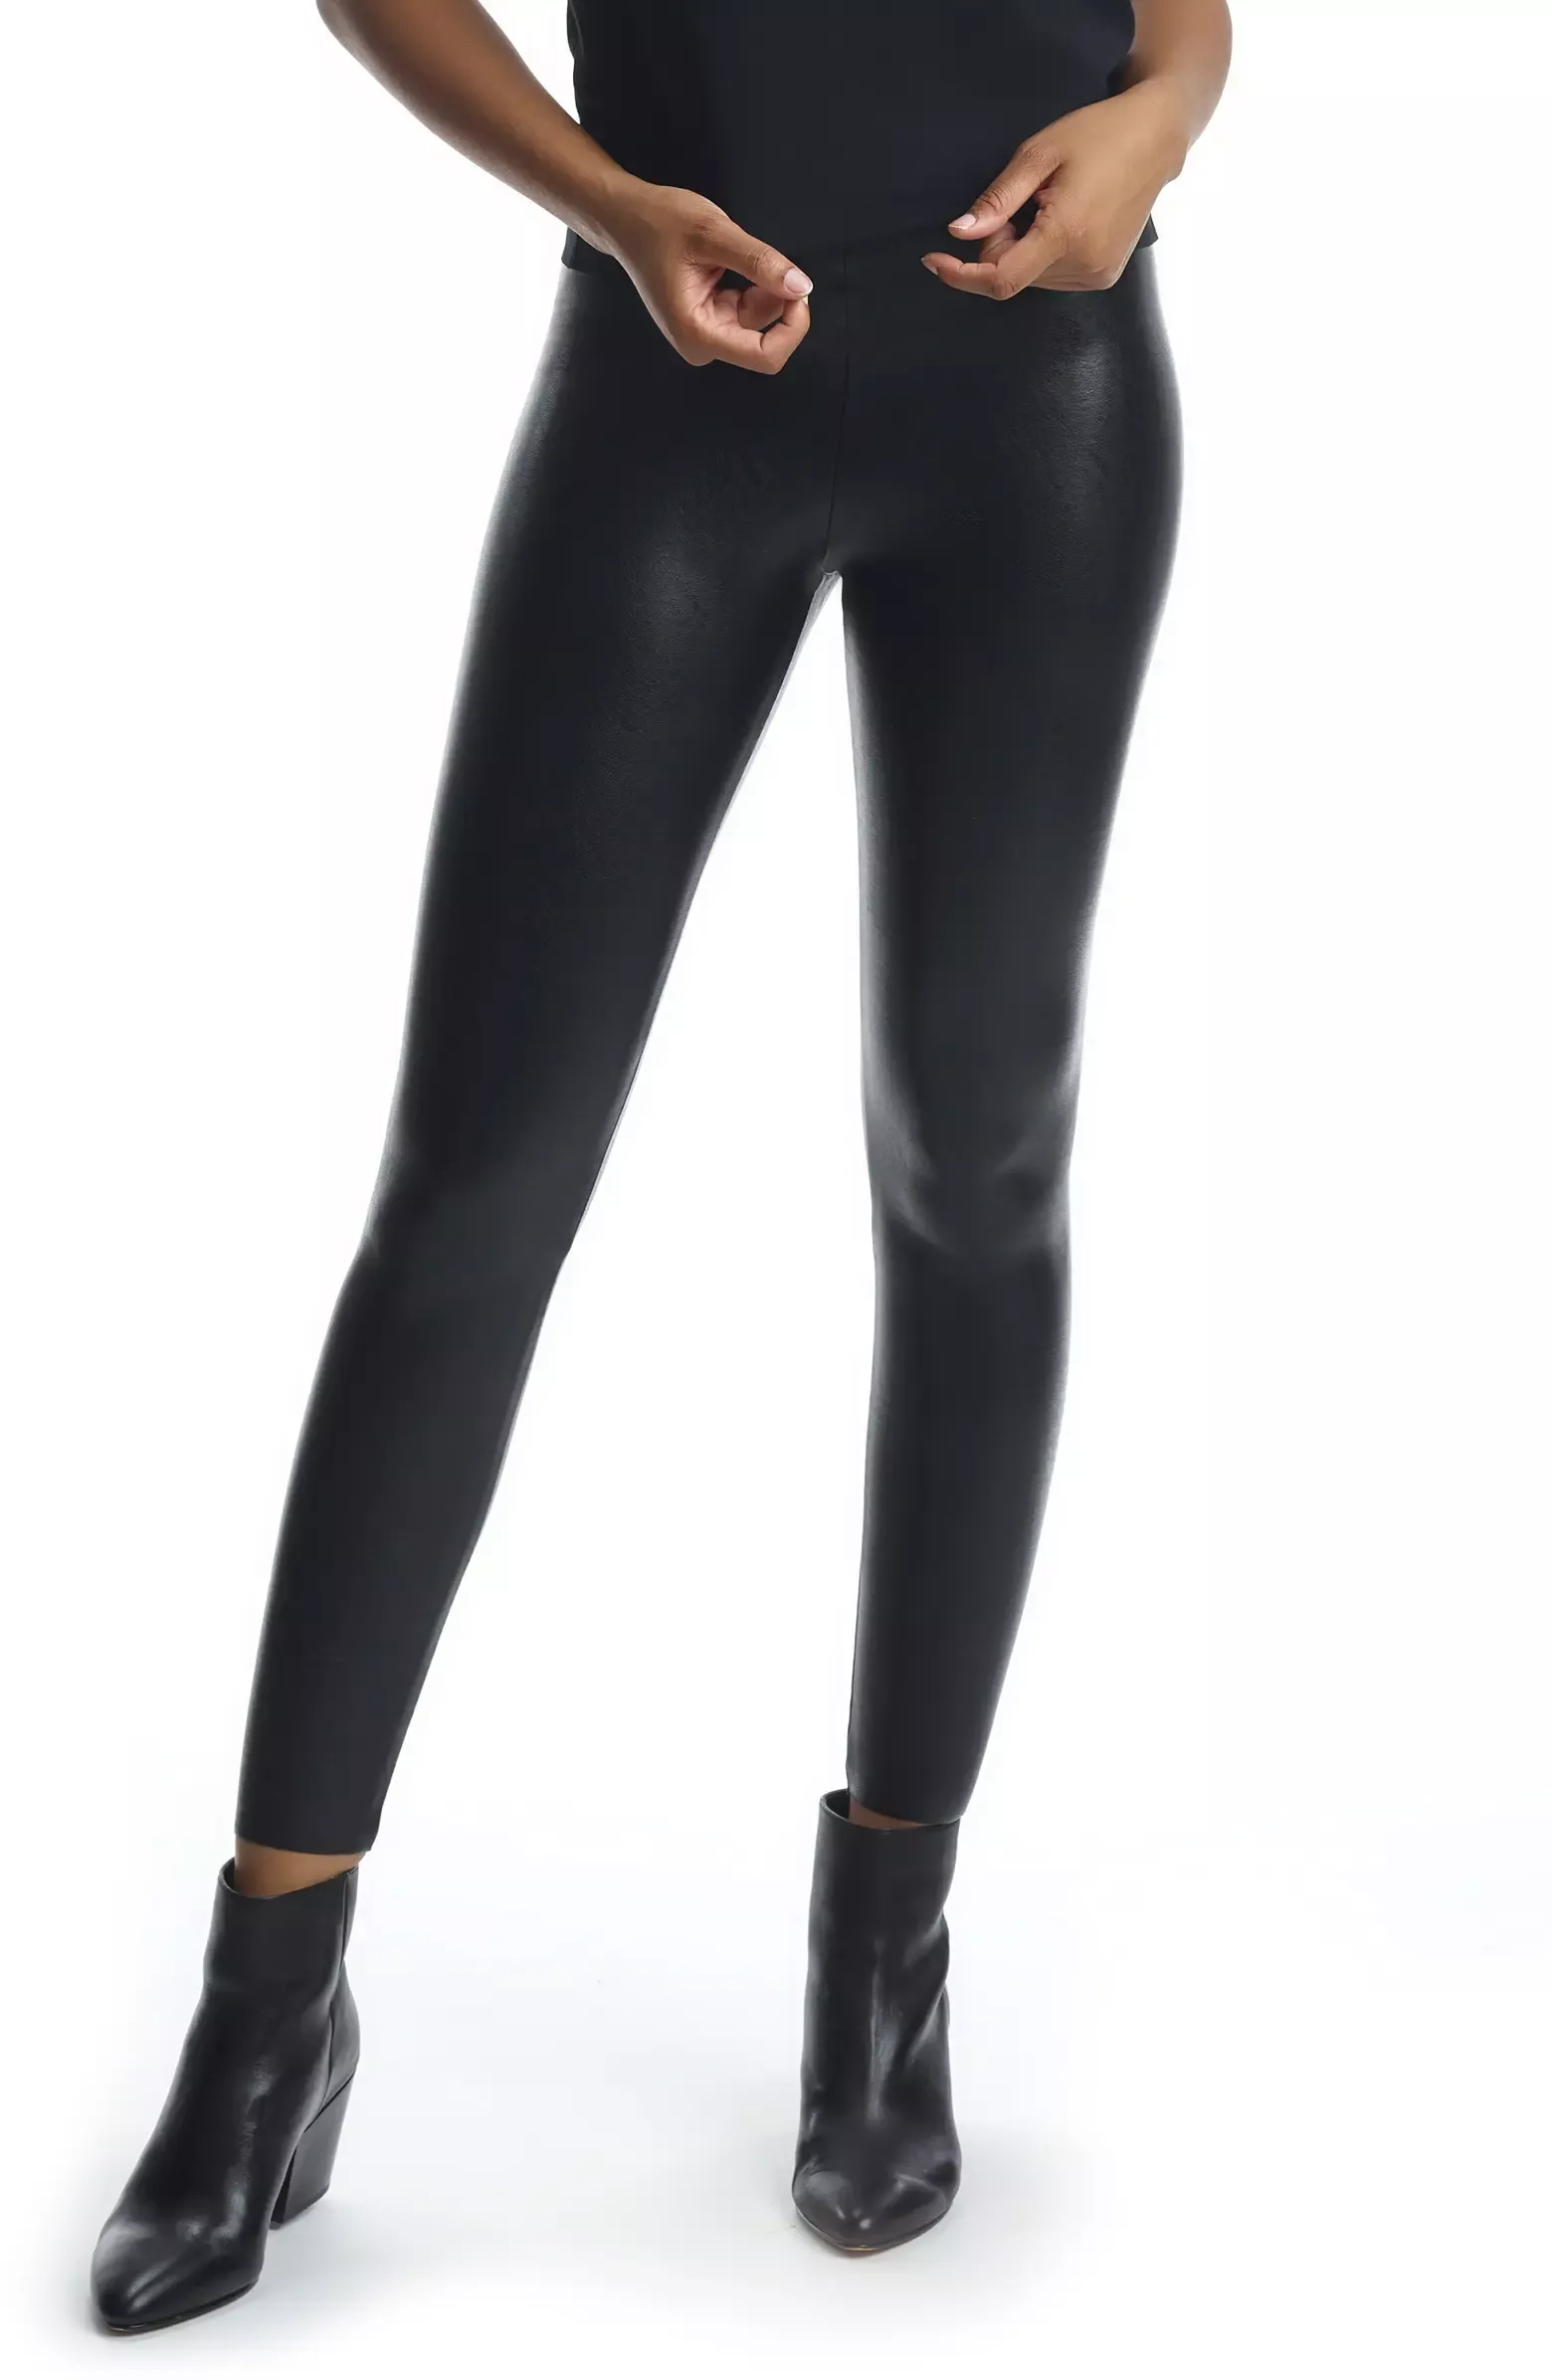 Jane and Bleecker Ladies' Faux Leather Legging Breathable A24 